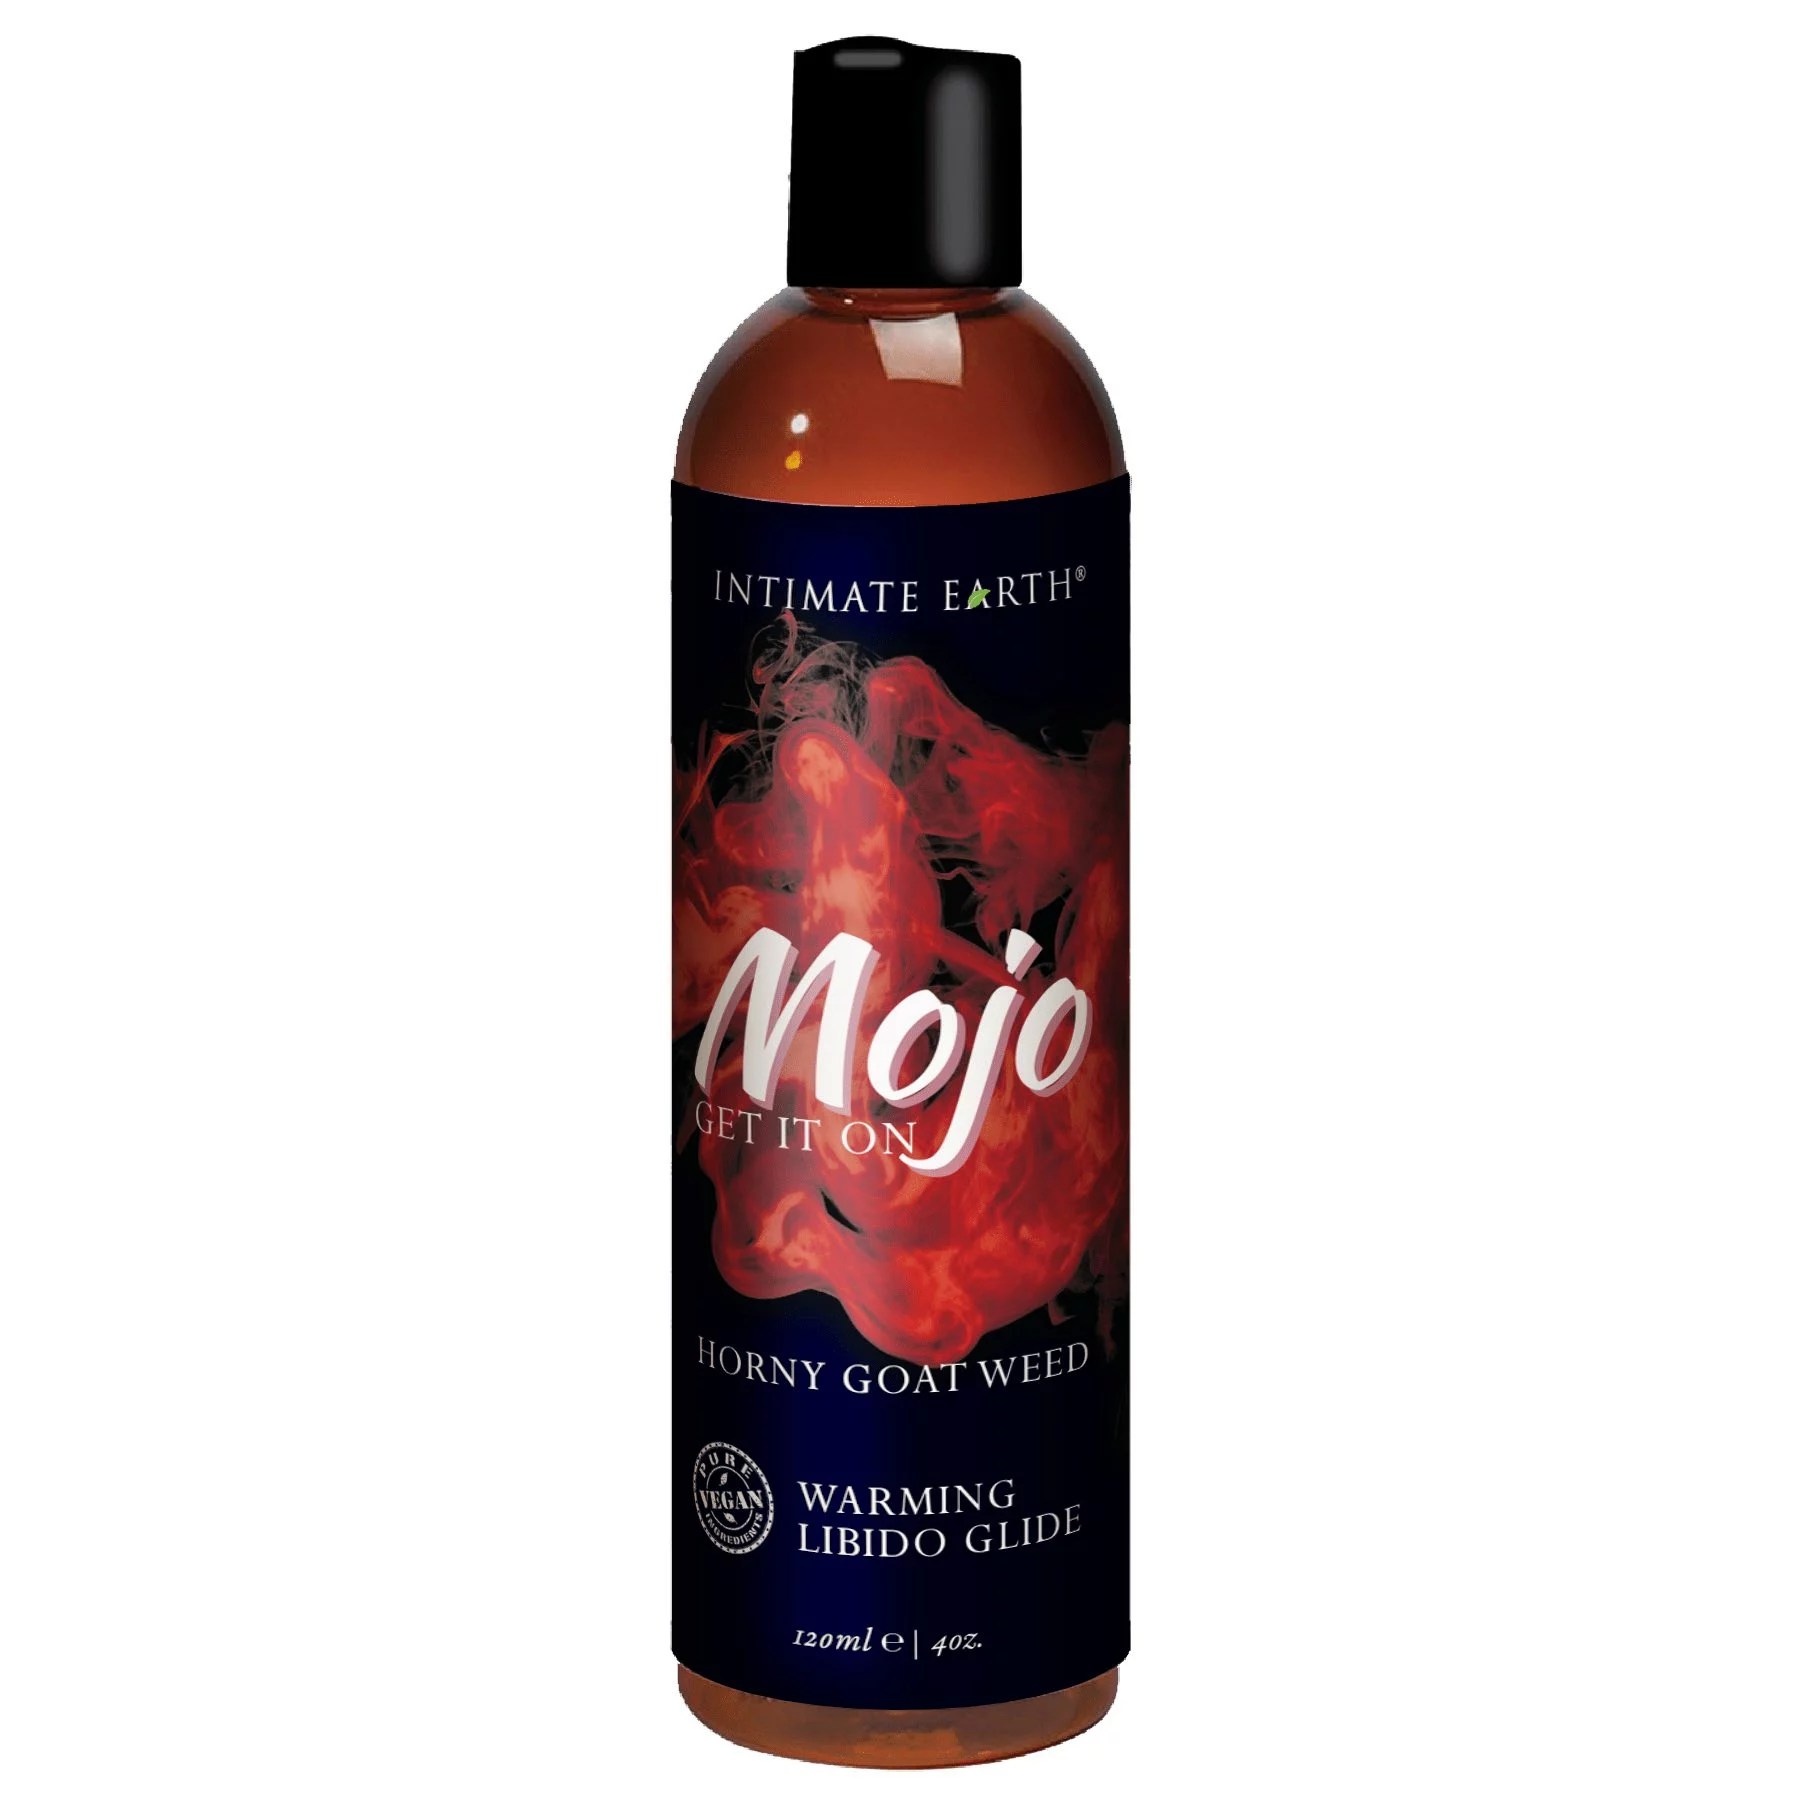 Mojo Horny Goat Weed Lube, warming lube